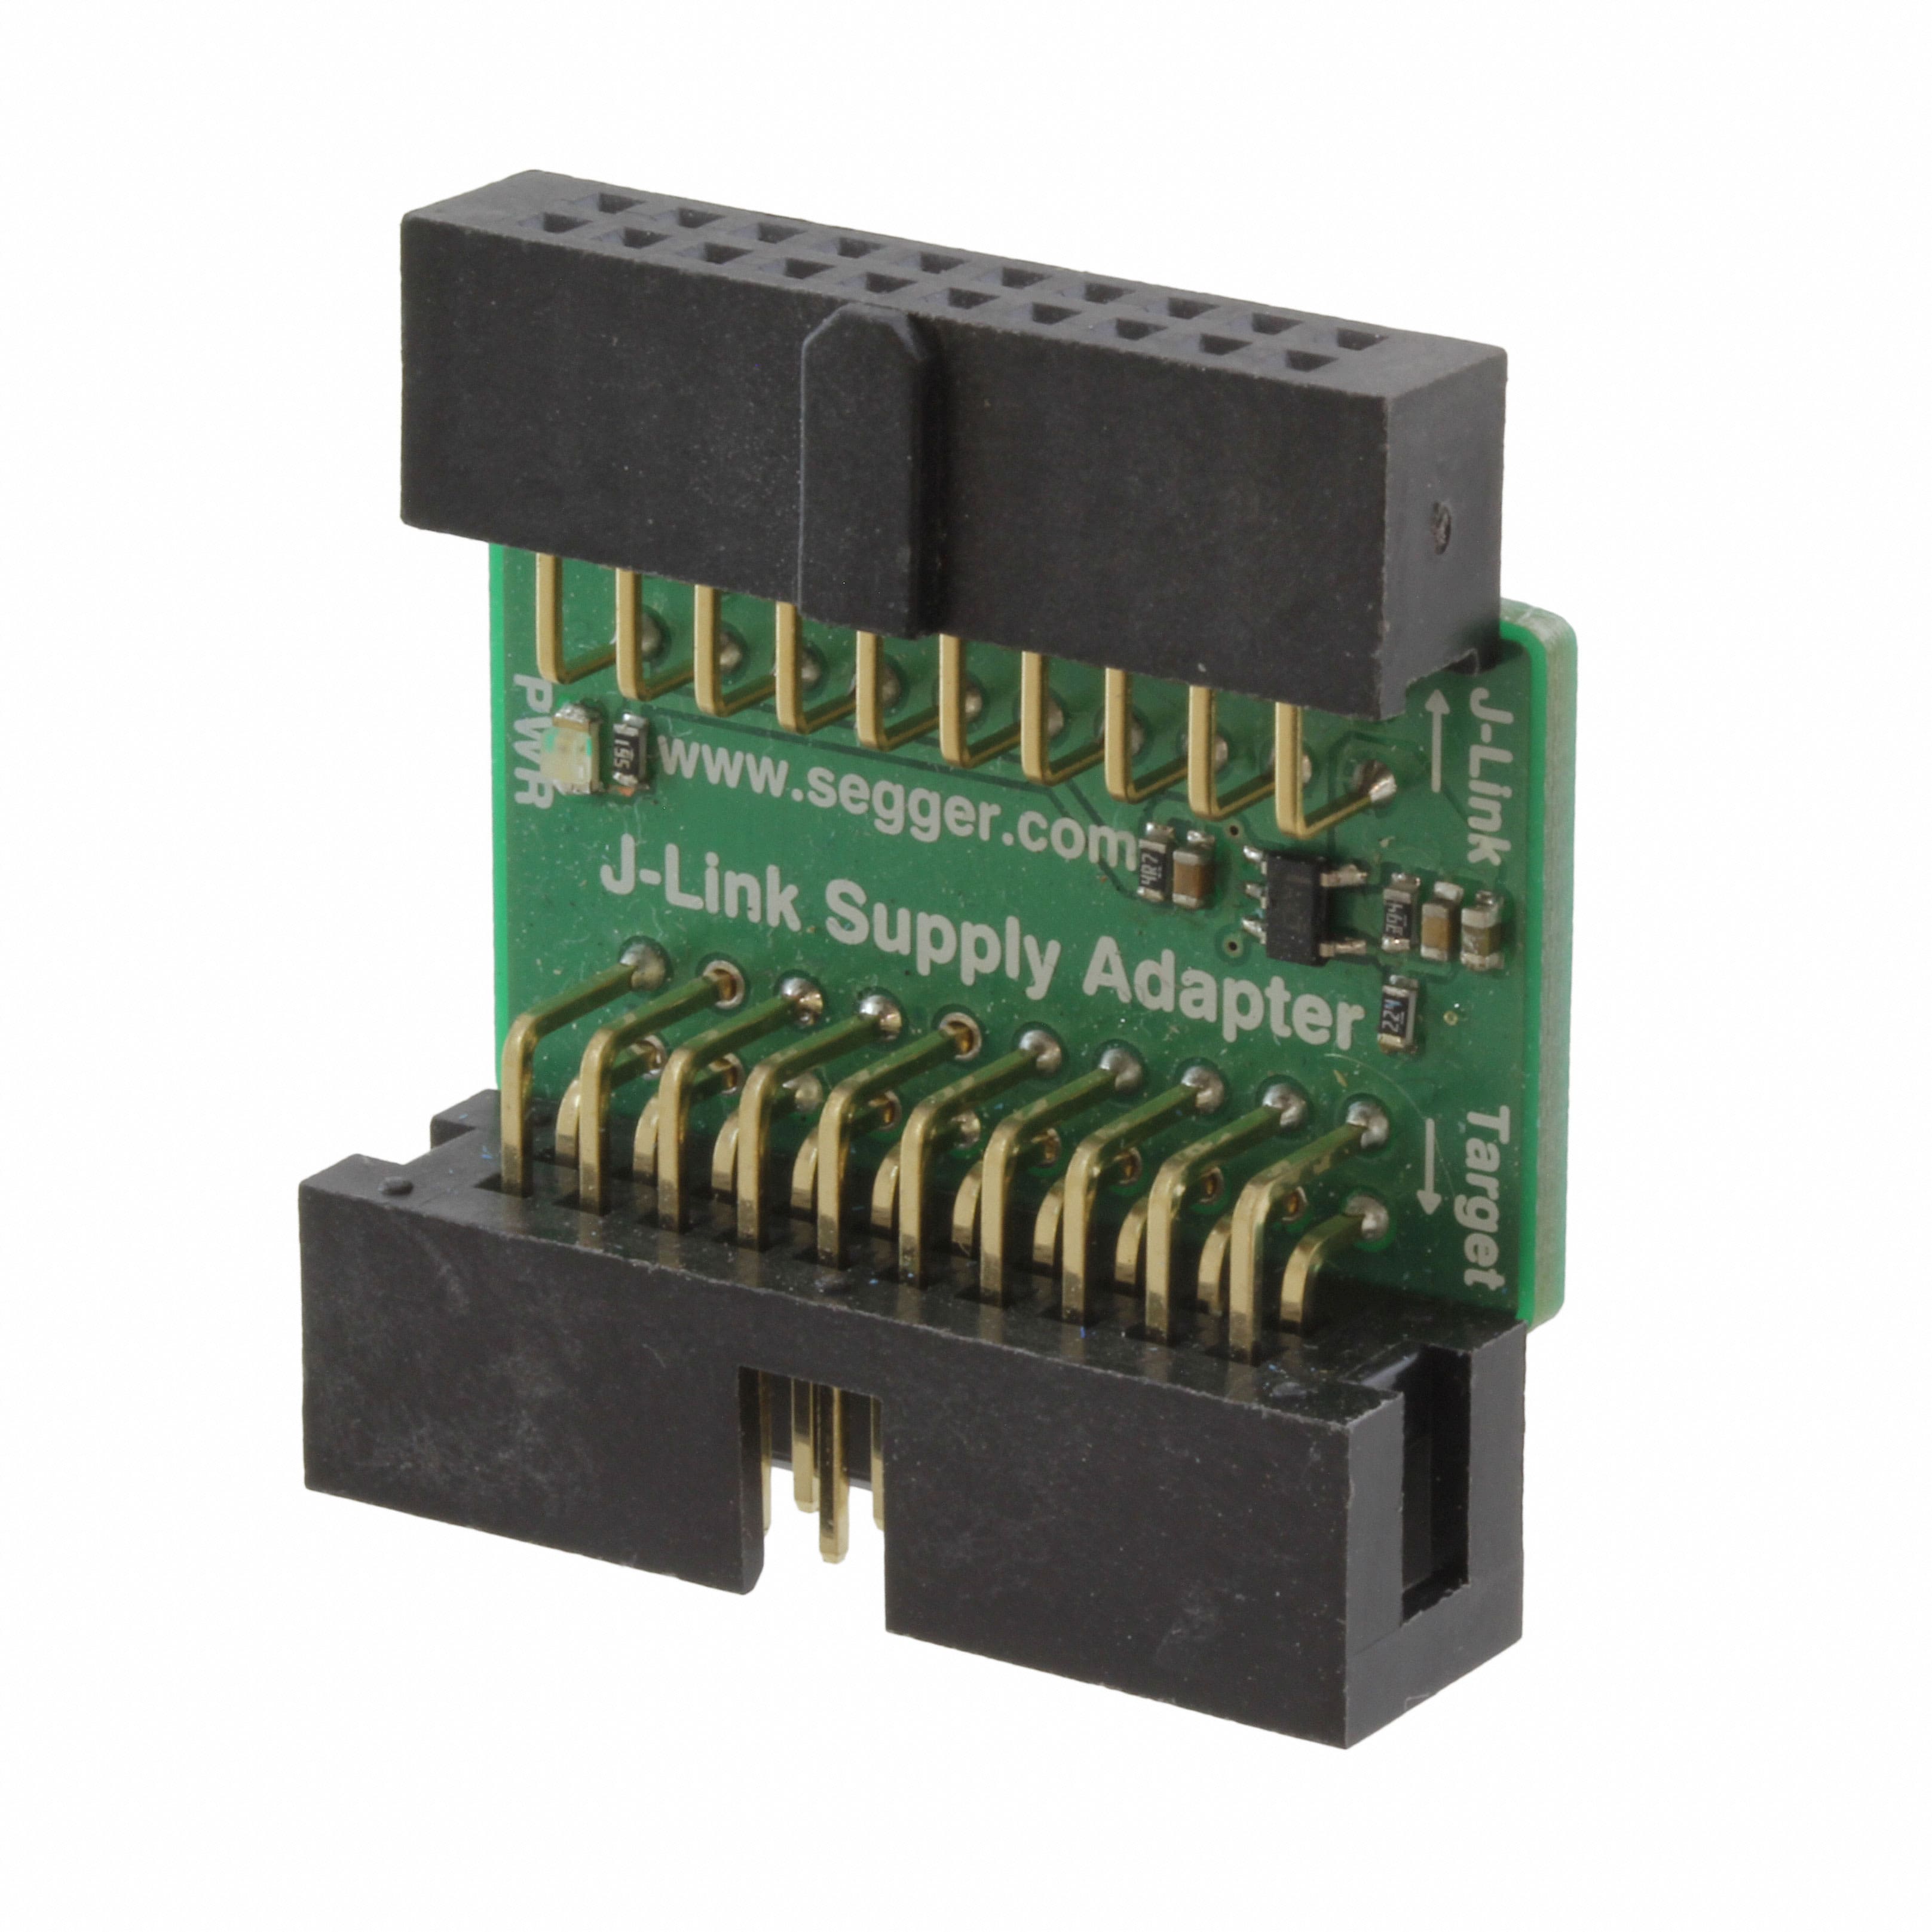 8.06.14 J-LINK SUPPLY ADAPTER Segger Microcontroller Systems                                                                    ADAPTER J-LINK SUPPLY